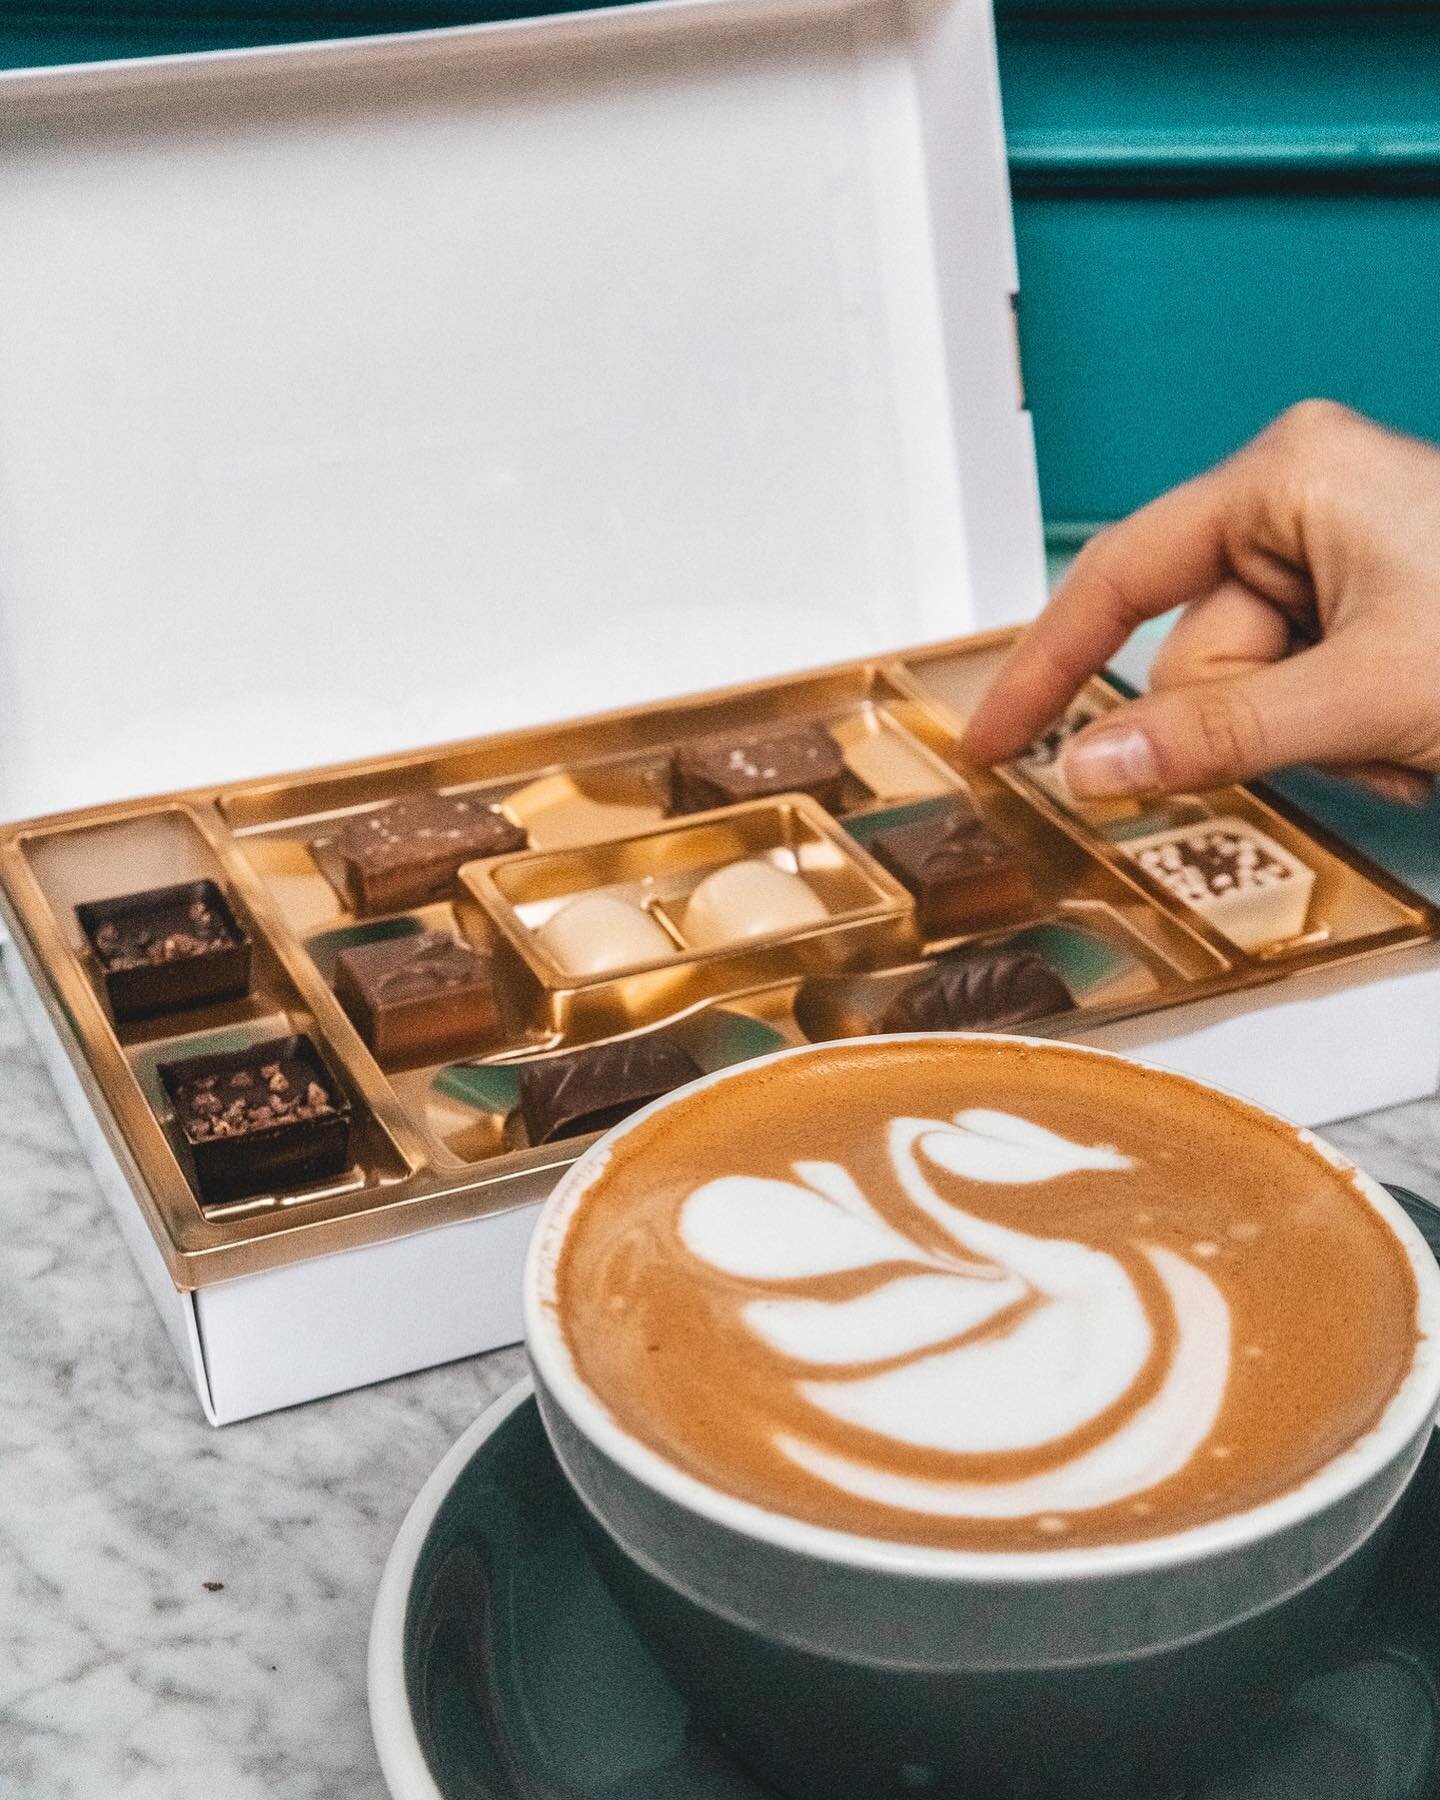 Life is like a Chocolate Box Latte. You always know what you're going to get. That's the saying, right? This month's sweet feature is guaranteed deliciousness.